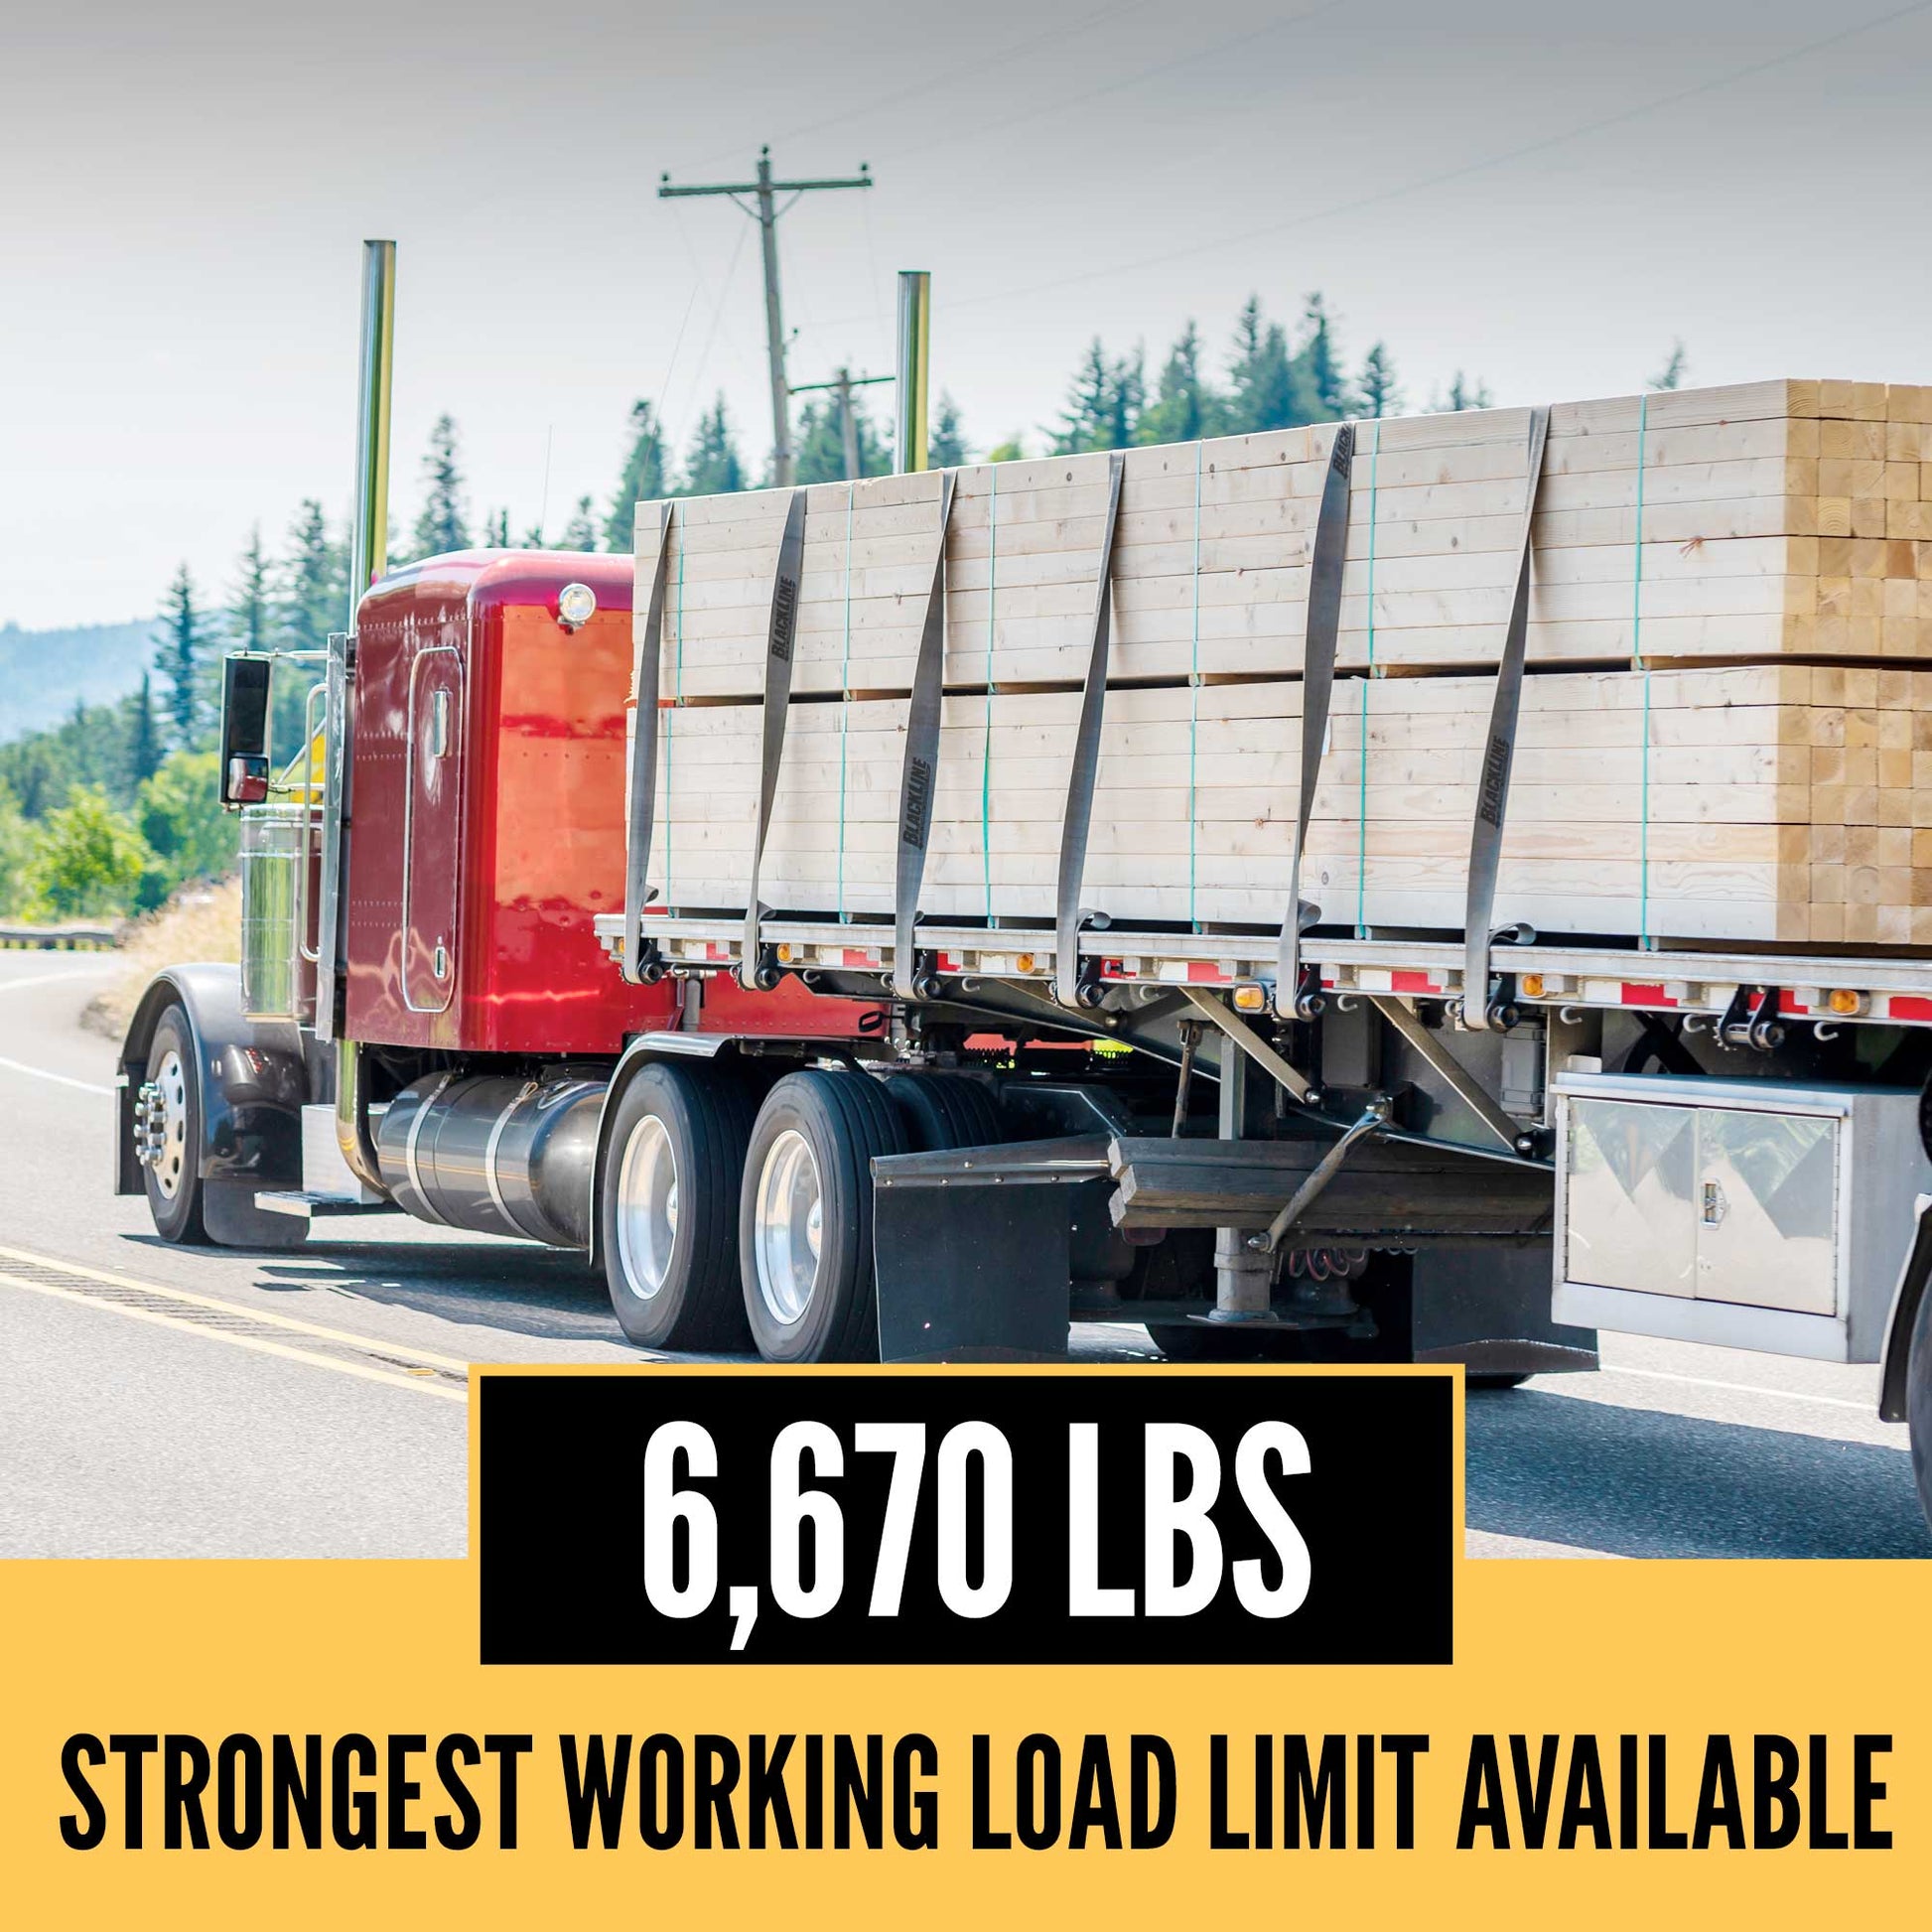 3.75' BlackLine strongest WLL in the industry at 6,670 lbs